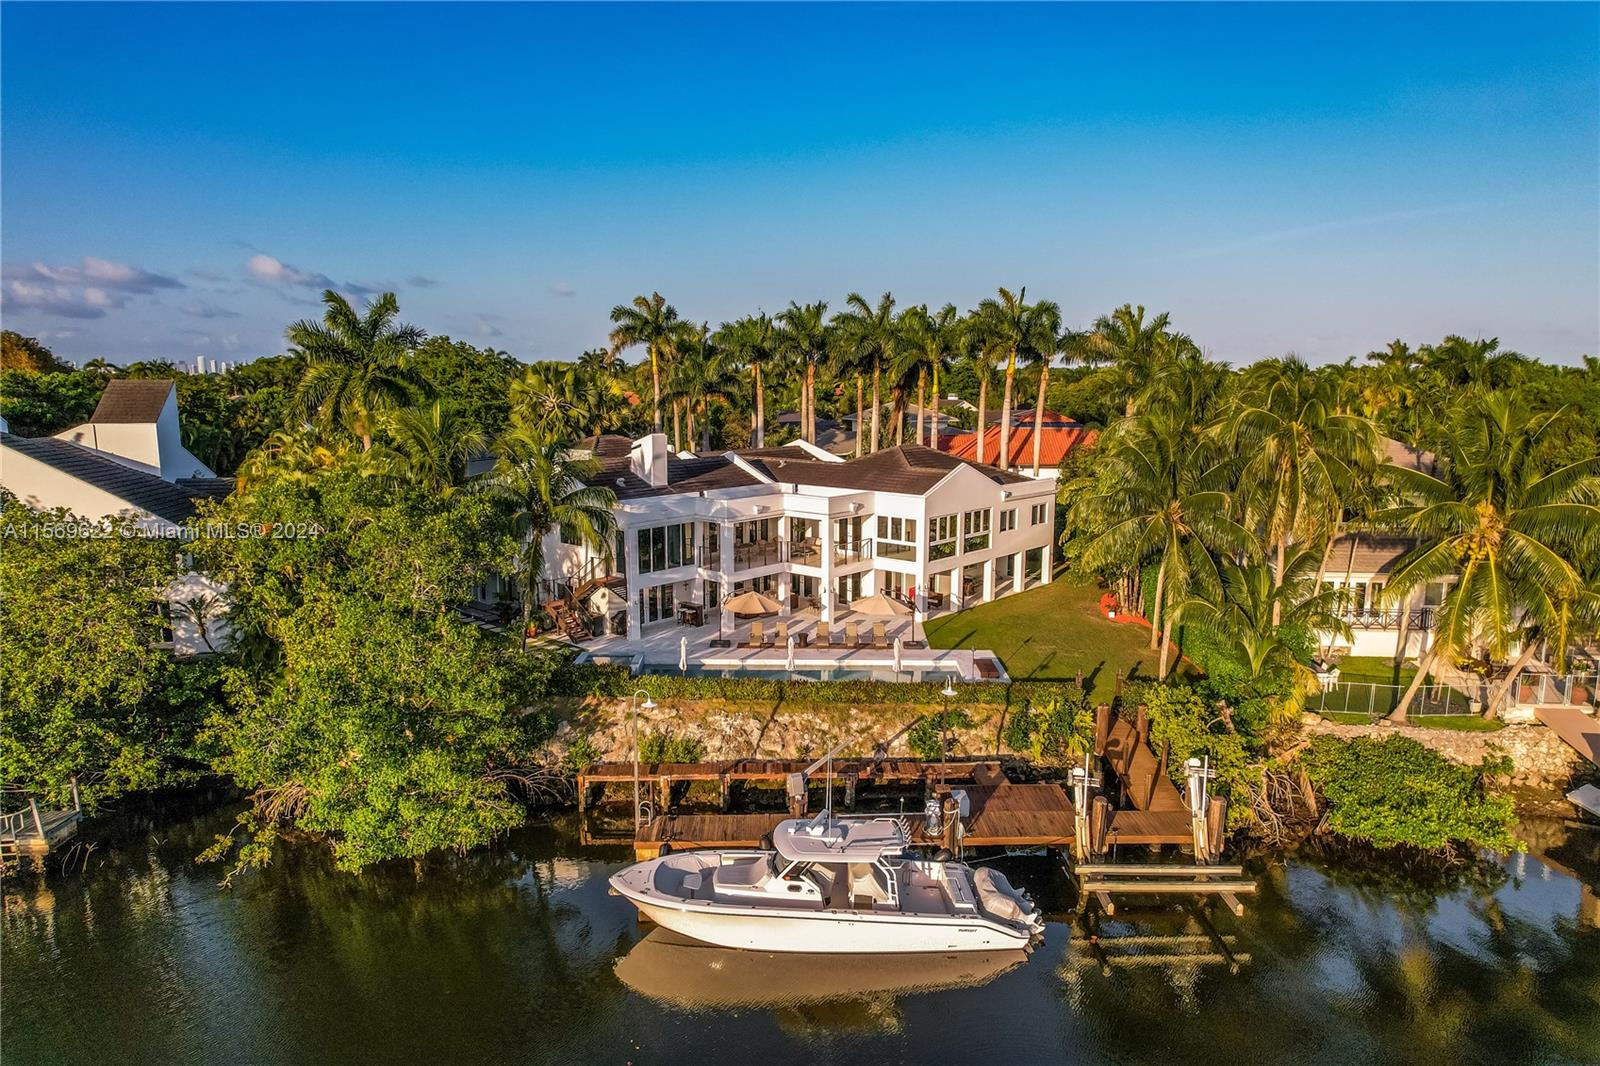 Islands of Cocoplum fully gutted, re-designed by Pacheco Arch, re-built/expanded in 2017, oversized 20k+ lot, 119 ft WF on Lago Maggiore’s expansive views. Main level lofty ceilings, open water view features living rm, Mia Cucina Kit, family rm w/wrap around terrace. Formal dining rm. Bedrm wing incl 2 jr suites & main suite w/sitting area, glass walled office & top $ view, spa bath, double California Closet, all 5-1 AV. Lower level 2/3 & laundry/utility/staff +Bonus media rm with 7.1 system, bar/lounge all open to lap pool, spa, expansive deck, fully refurbished dock. Meticulous attention to detail, materials, lighting, smart controls, security, AV & appliances, chosen w/highest & most current standards for enjoyment & entertaining. Gated motor court for 20 cars, 3 car AC garage/gym.